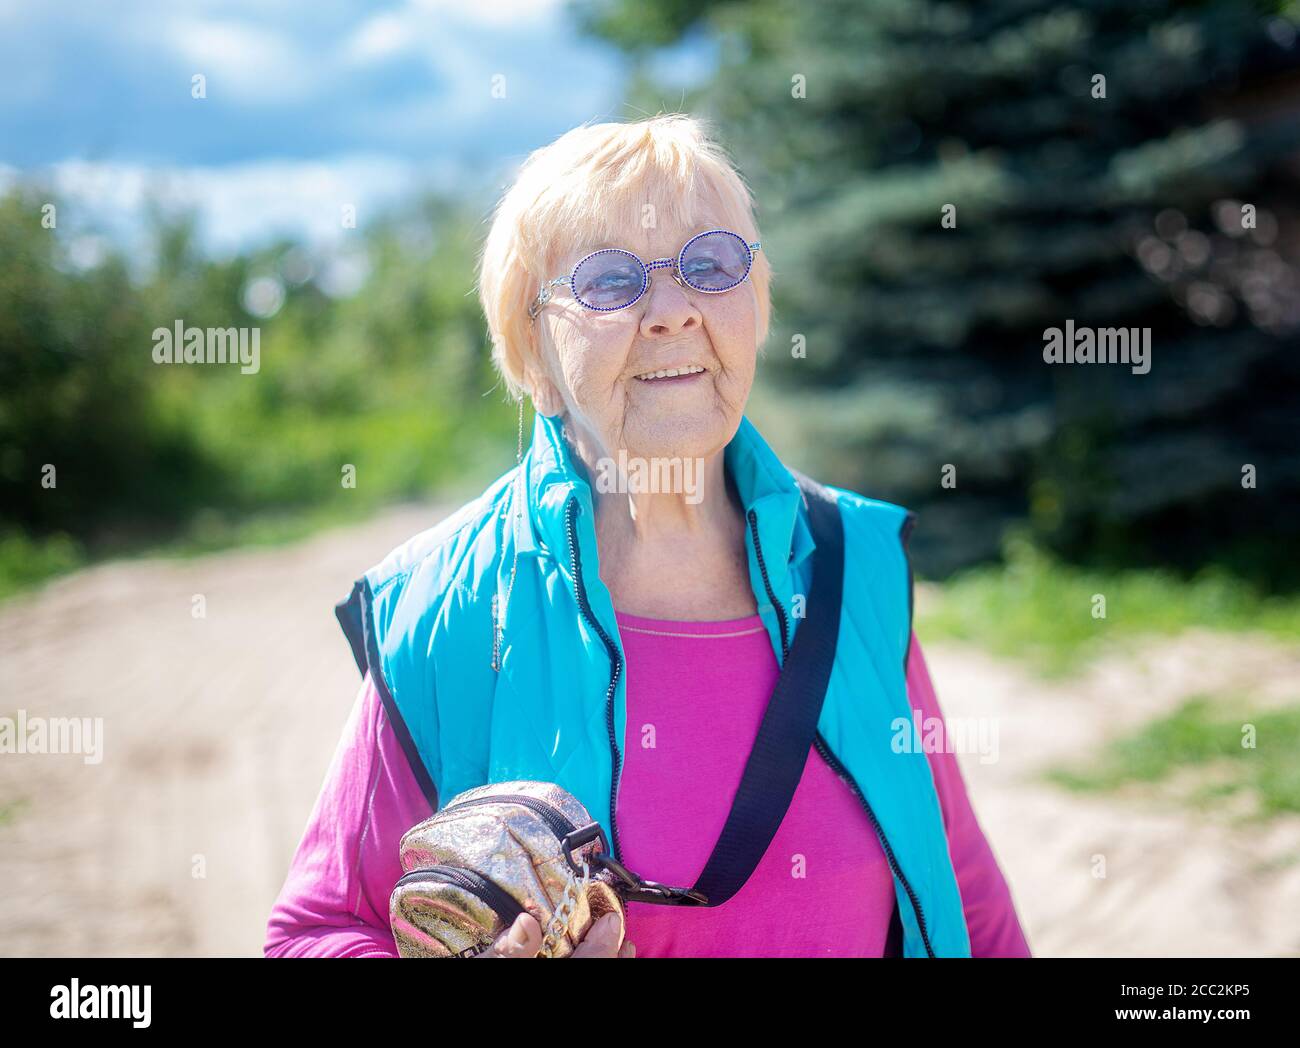 Happy, fashionable 90-year-old grandmother with gray hair, sunglasses and a smile in nature on a Sunny summer day. Stock Photo